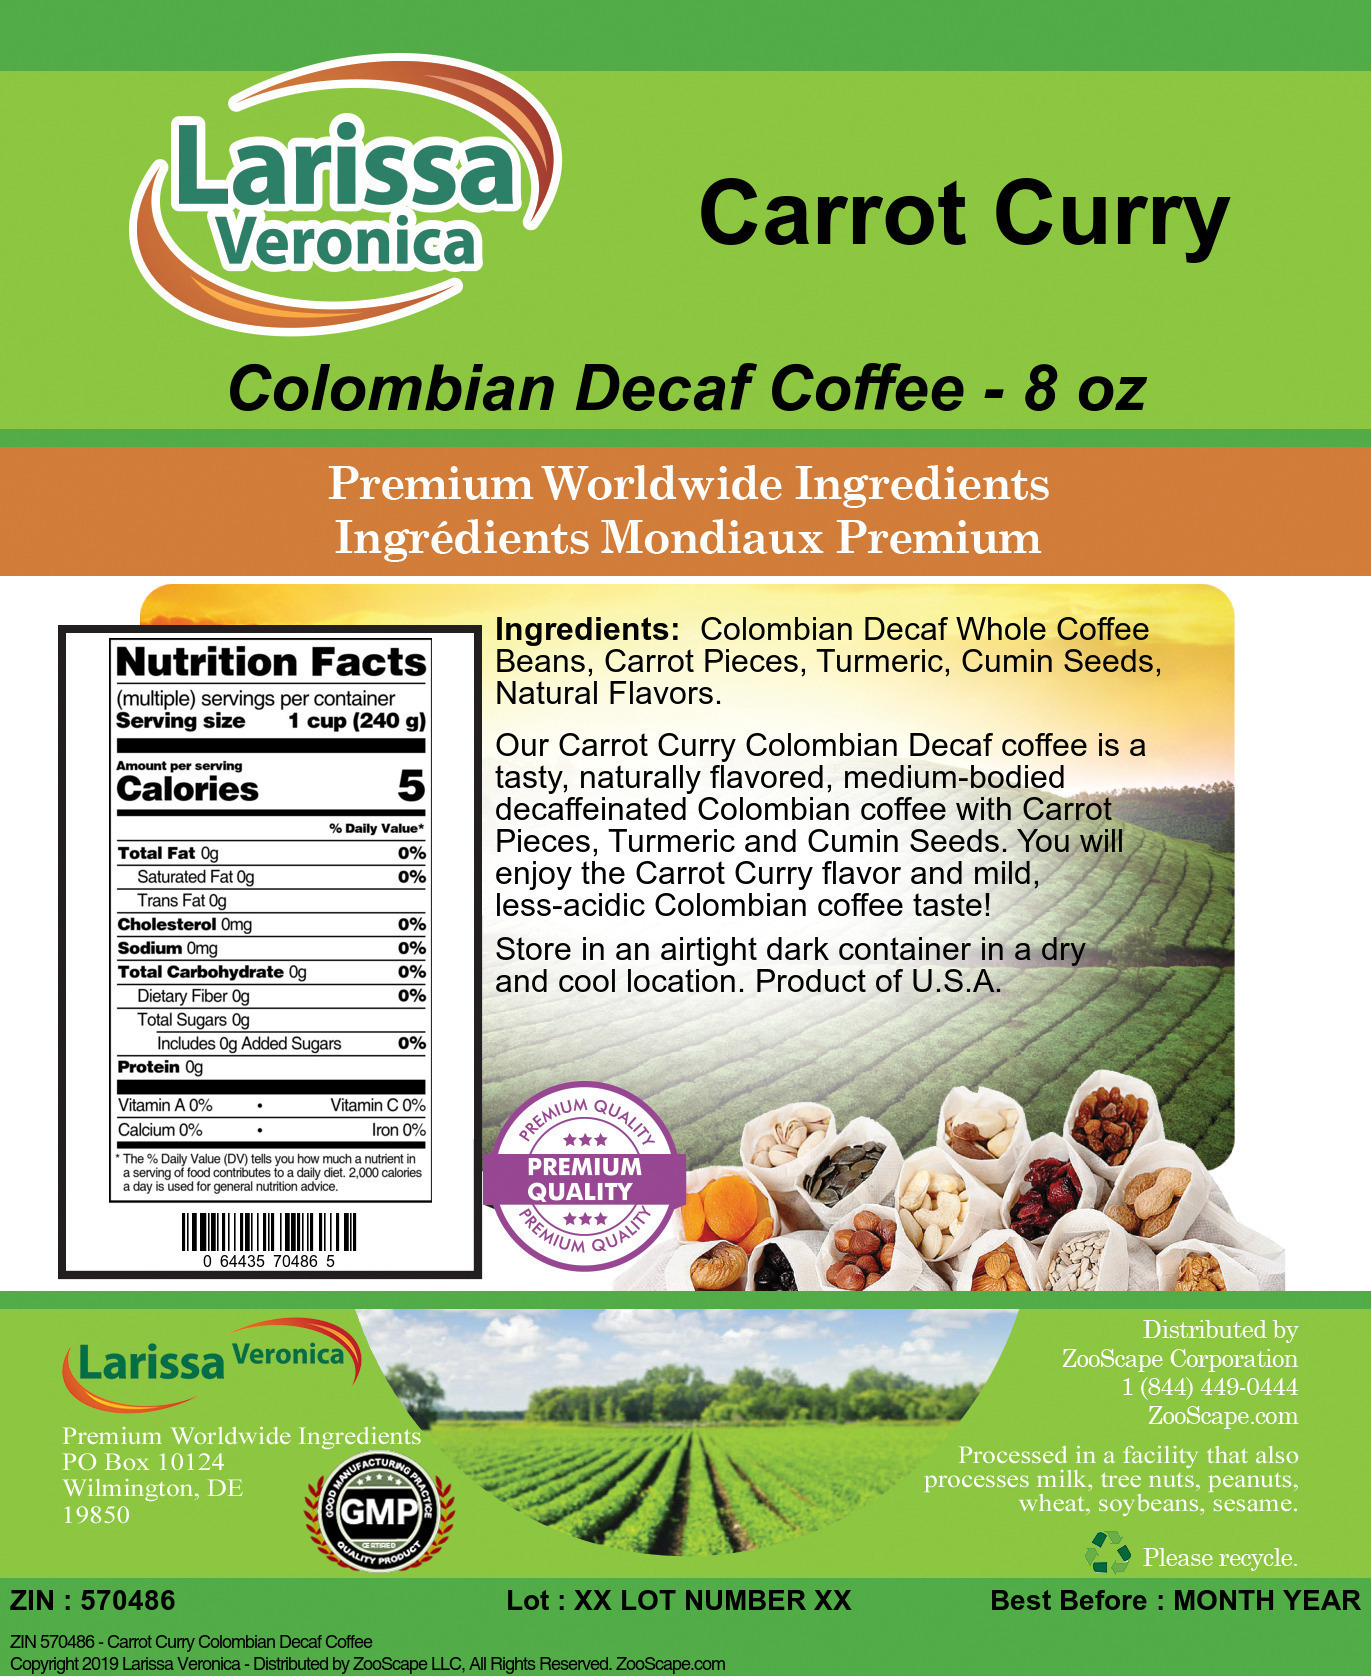 Carrot Curry Colombian Decaf Coffee - Label